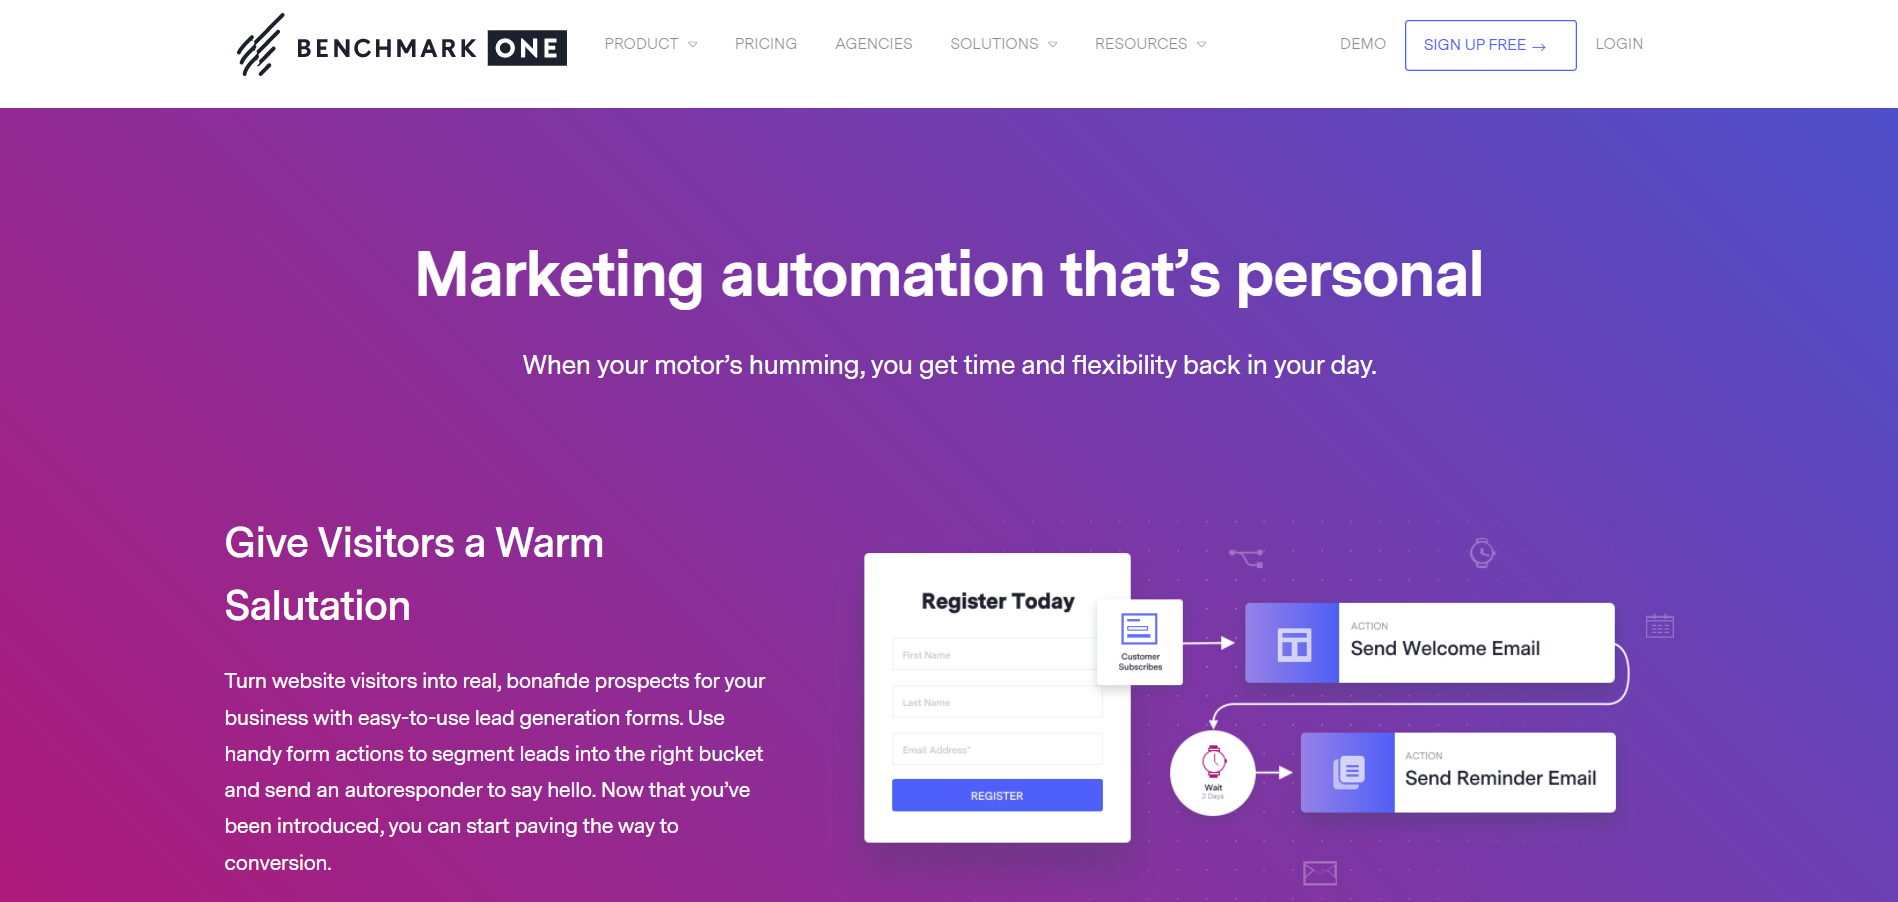 Marketing Automation for Small Business BenchmarkONE